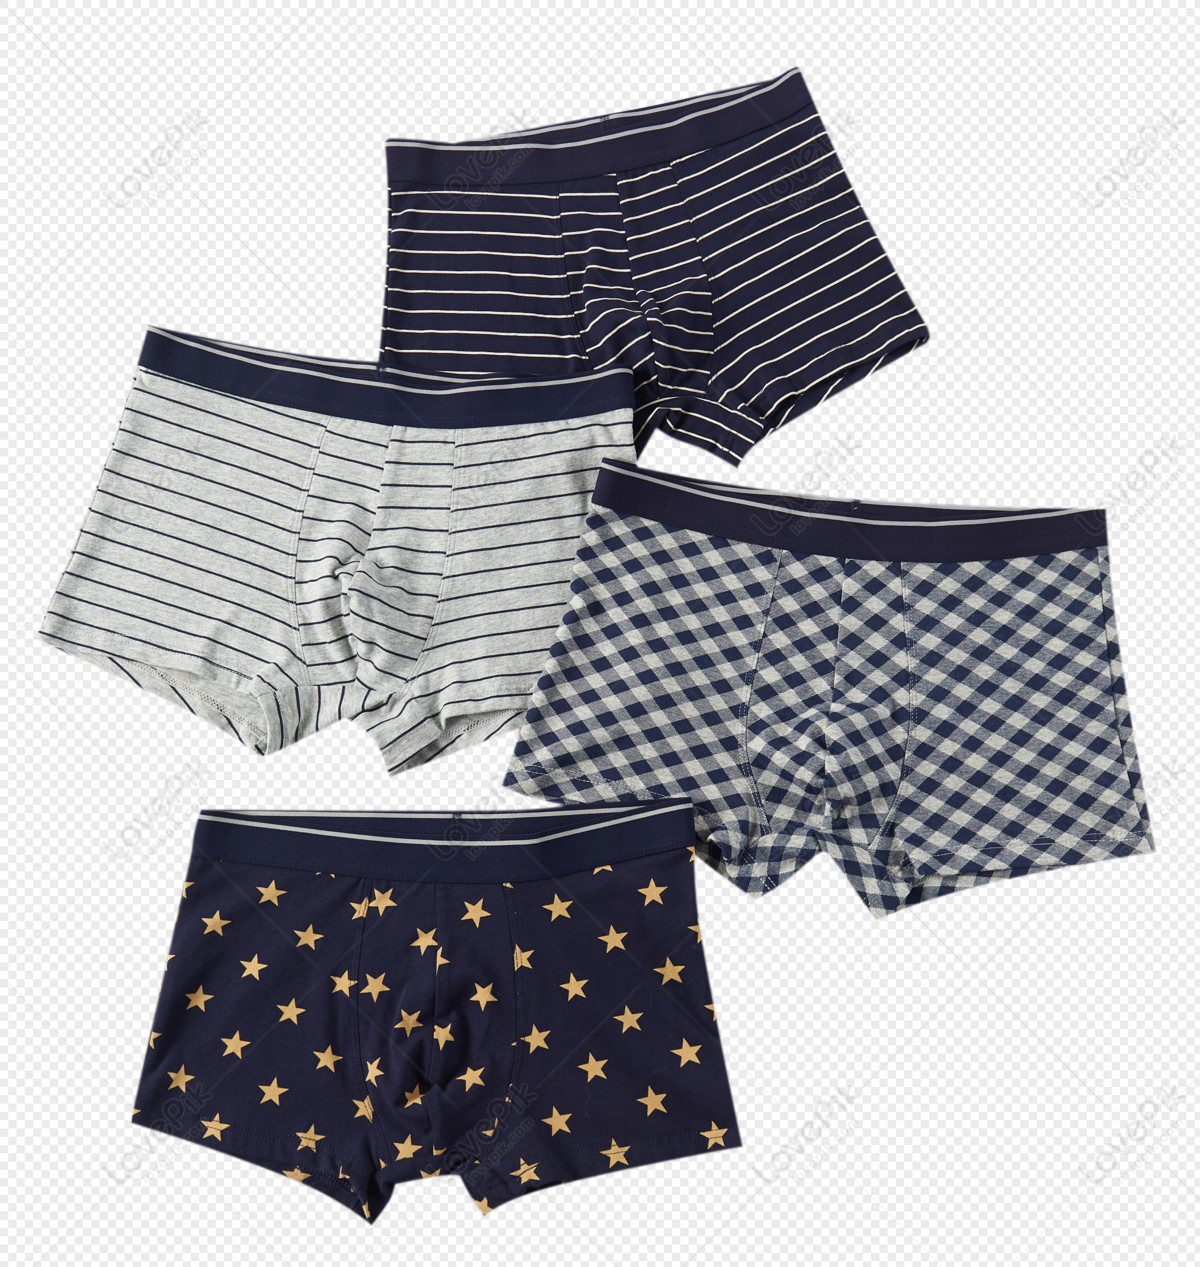 Undergarments Pictures  Download Free Images on Unsplash